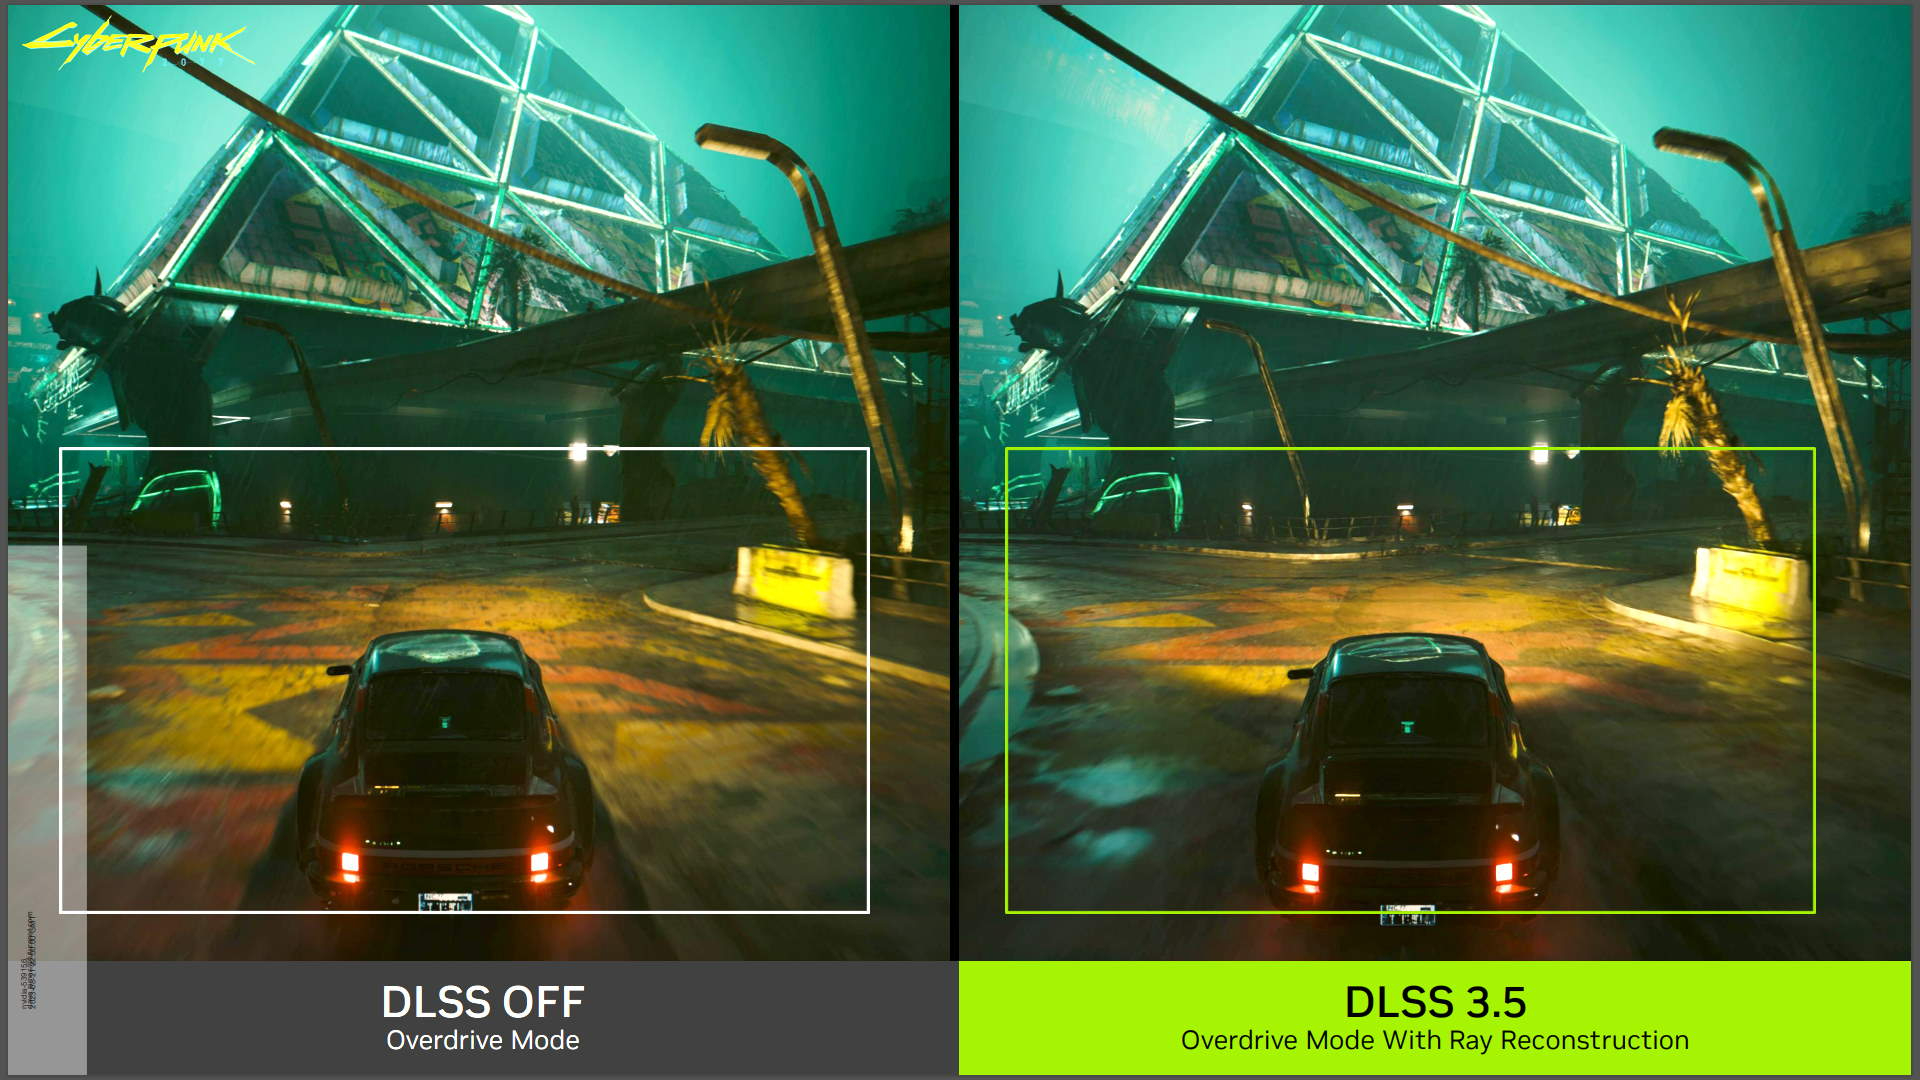  Nvidia's imminent DLSS 3.5 update will improve ray tracing and performance across all RTX GPUs 